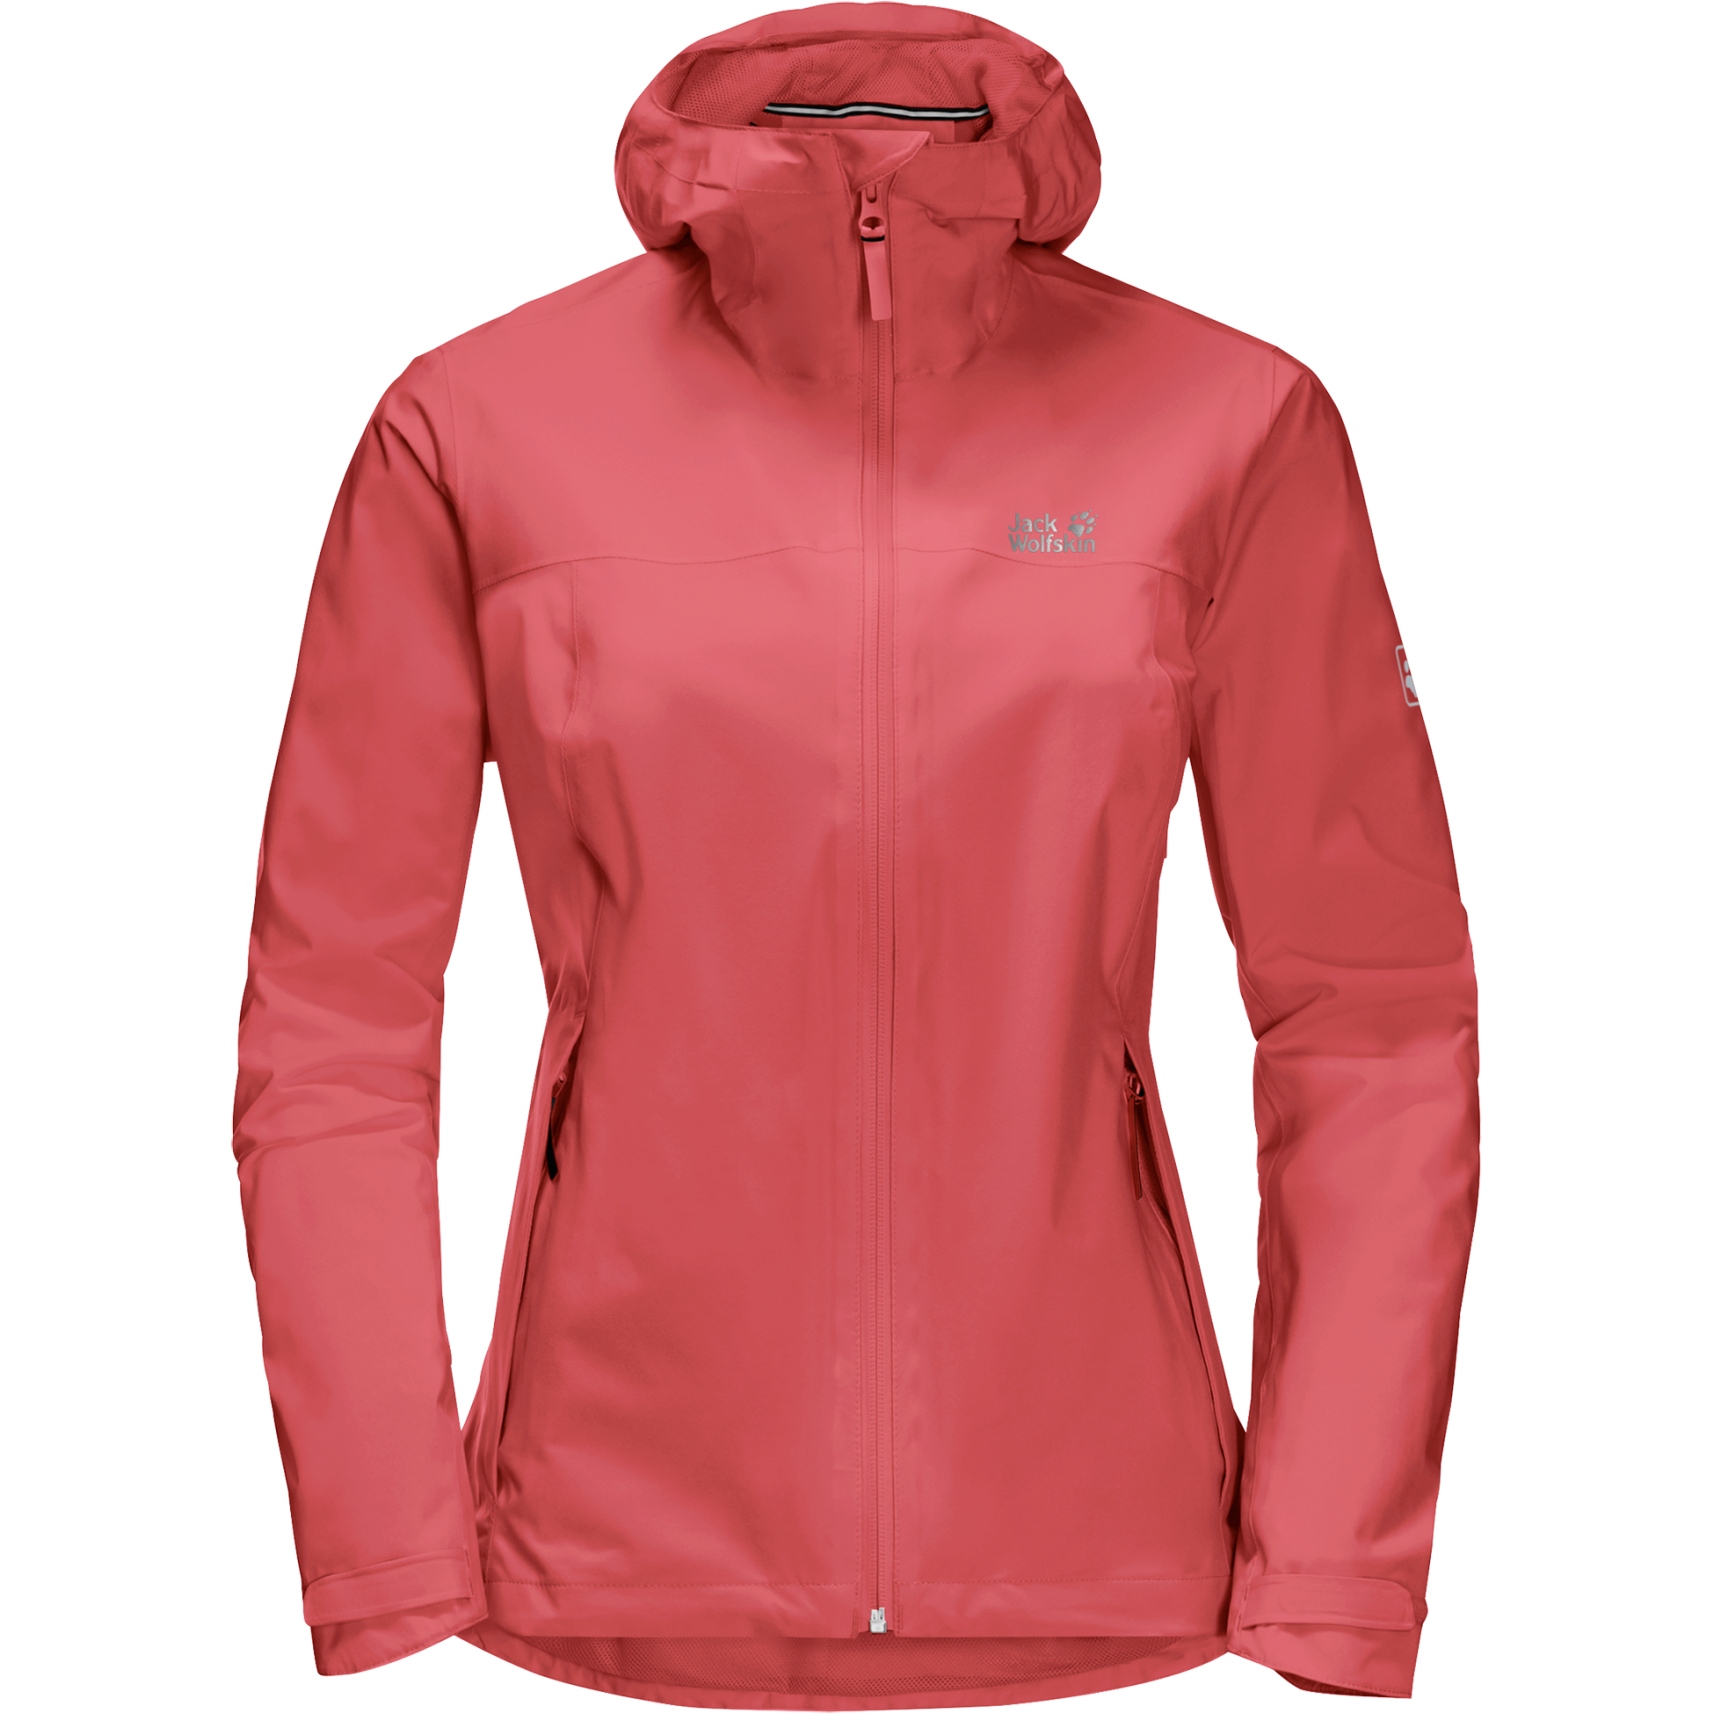 Picture of Jack Wolfskin JWP Shell Jacket Women - coral red